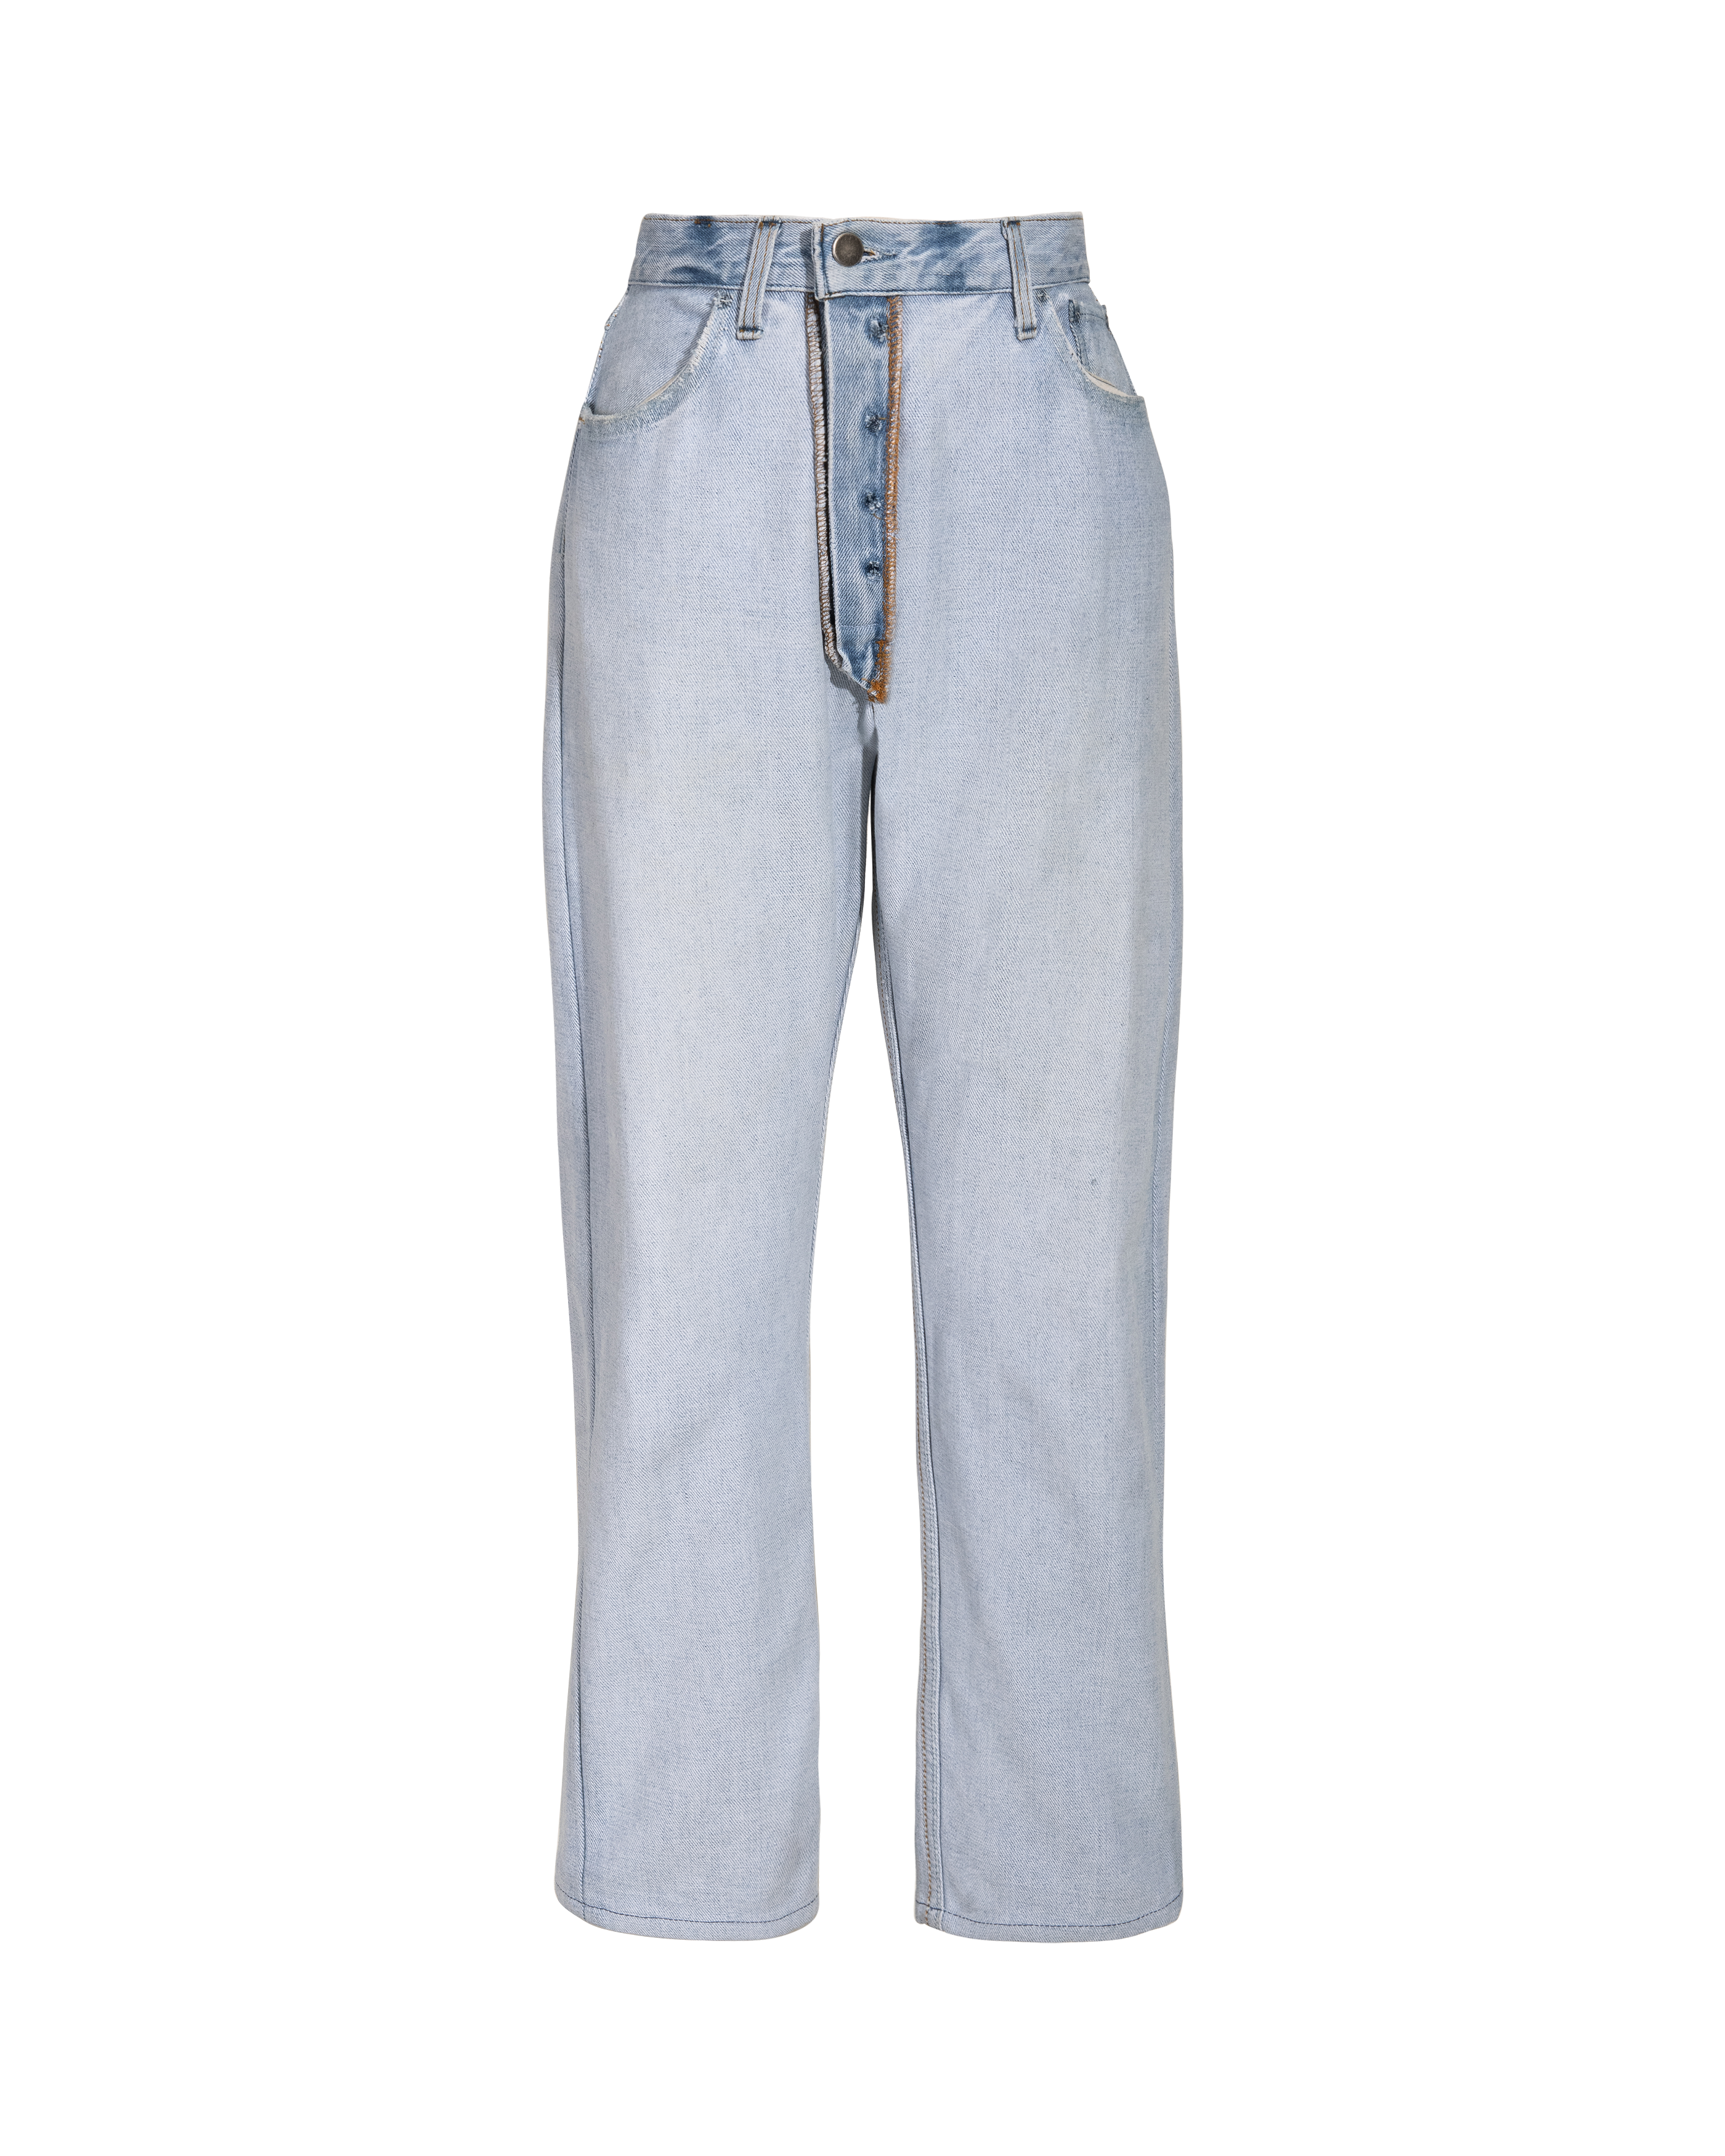 A/W 2003 Artisanal Inverted Jeans